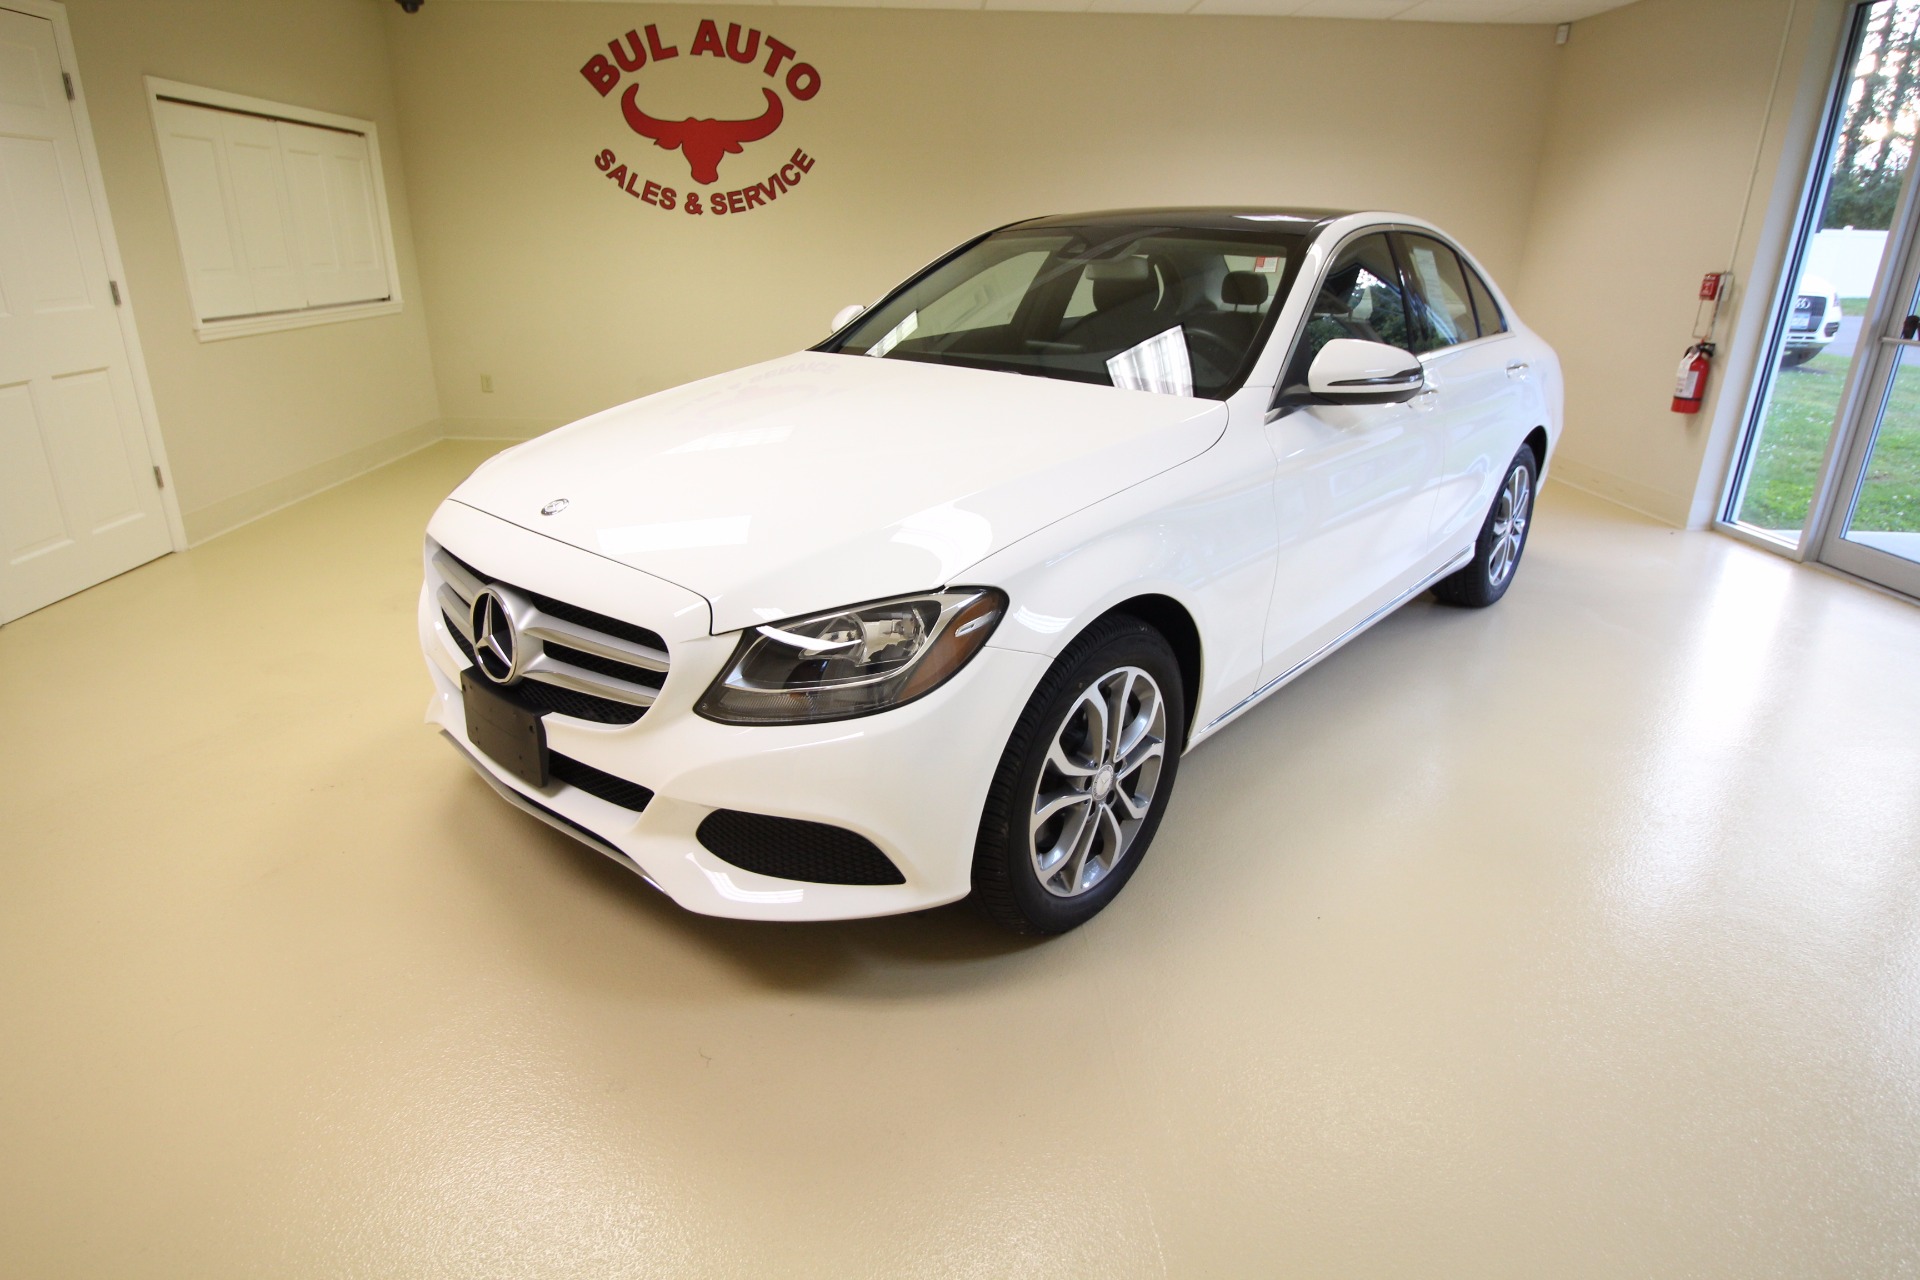 2017 Mercedes Benz C Class C300 4matic Sedan Stock 17180 For Sale Near Albany Ny Ny Mercedes Benz Dealer For Sale In Albany Ny 17180 Bul Auto Sales